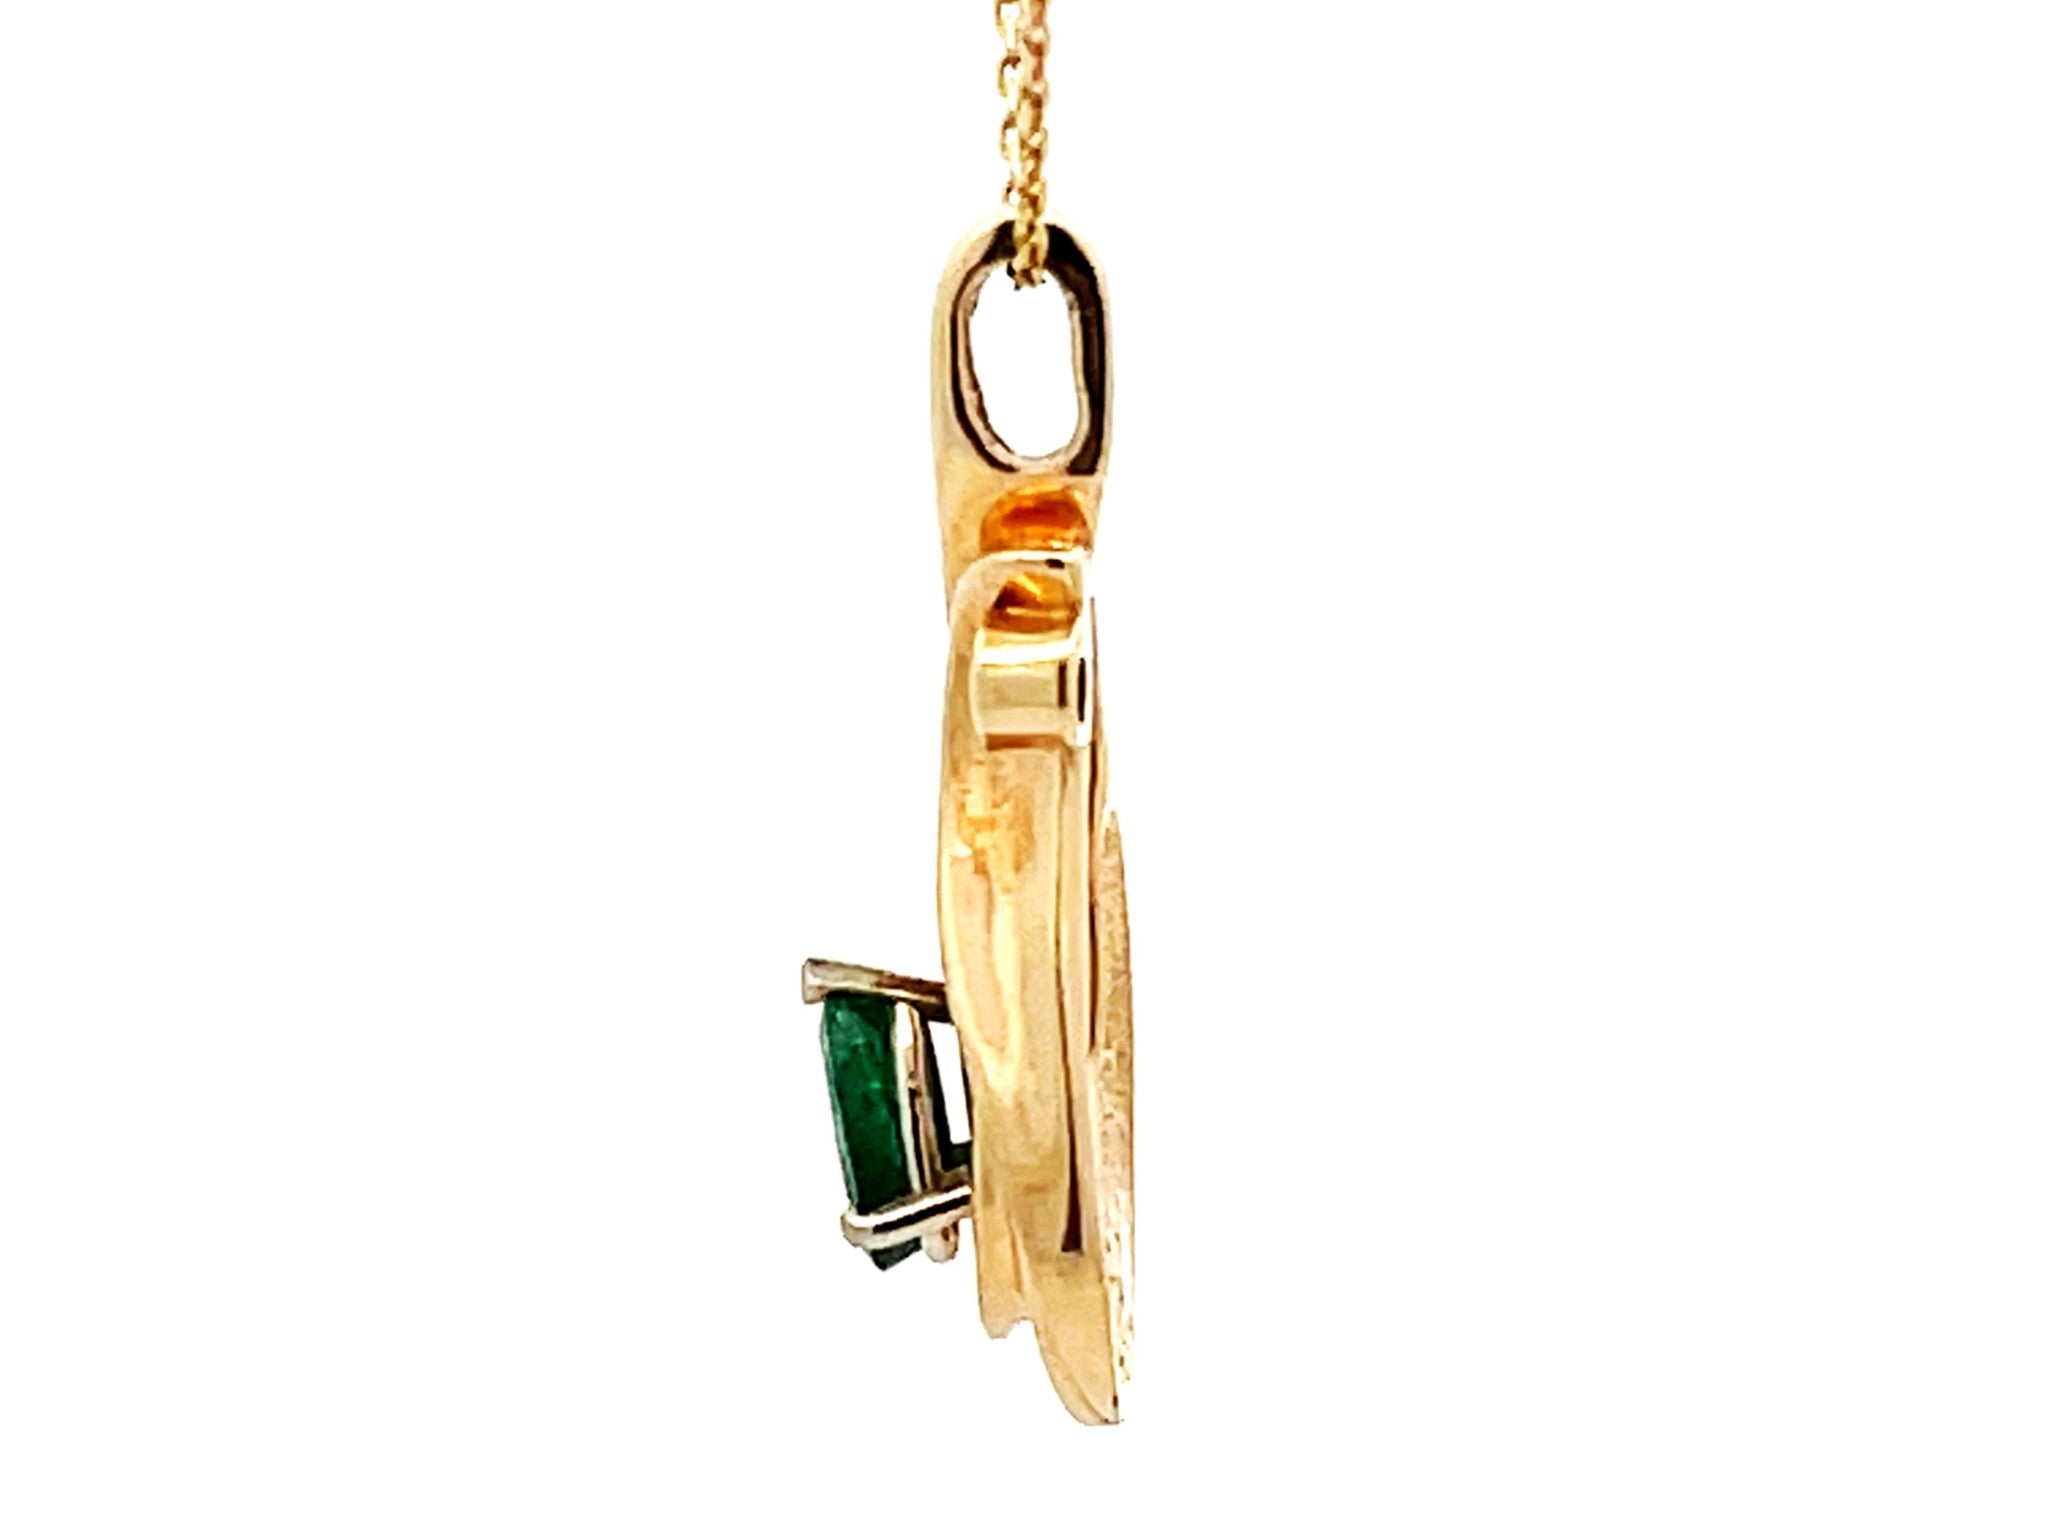 Pear Shaped Emerald and Diamond Necklace 14K Yellow Gold